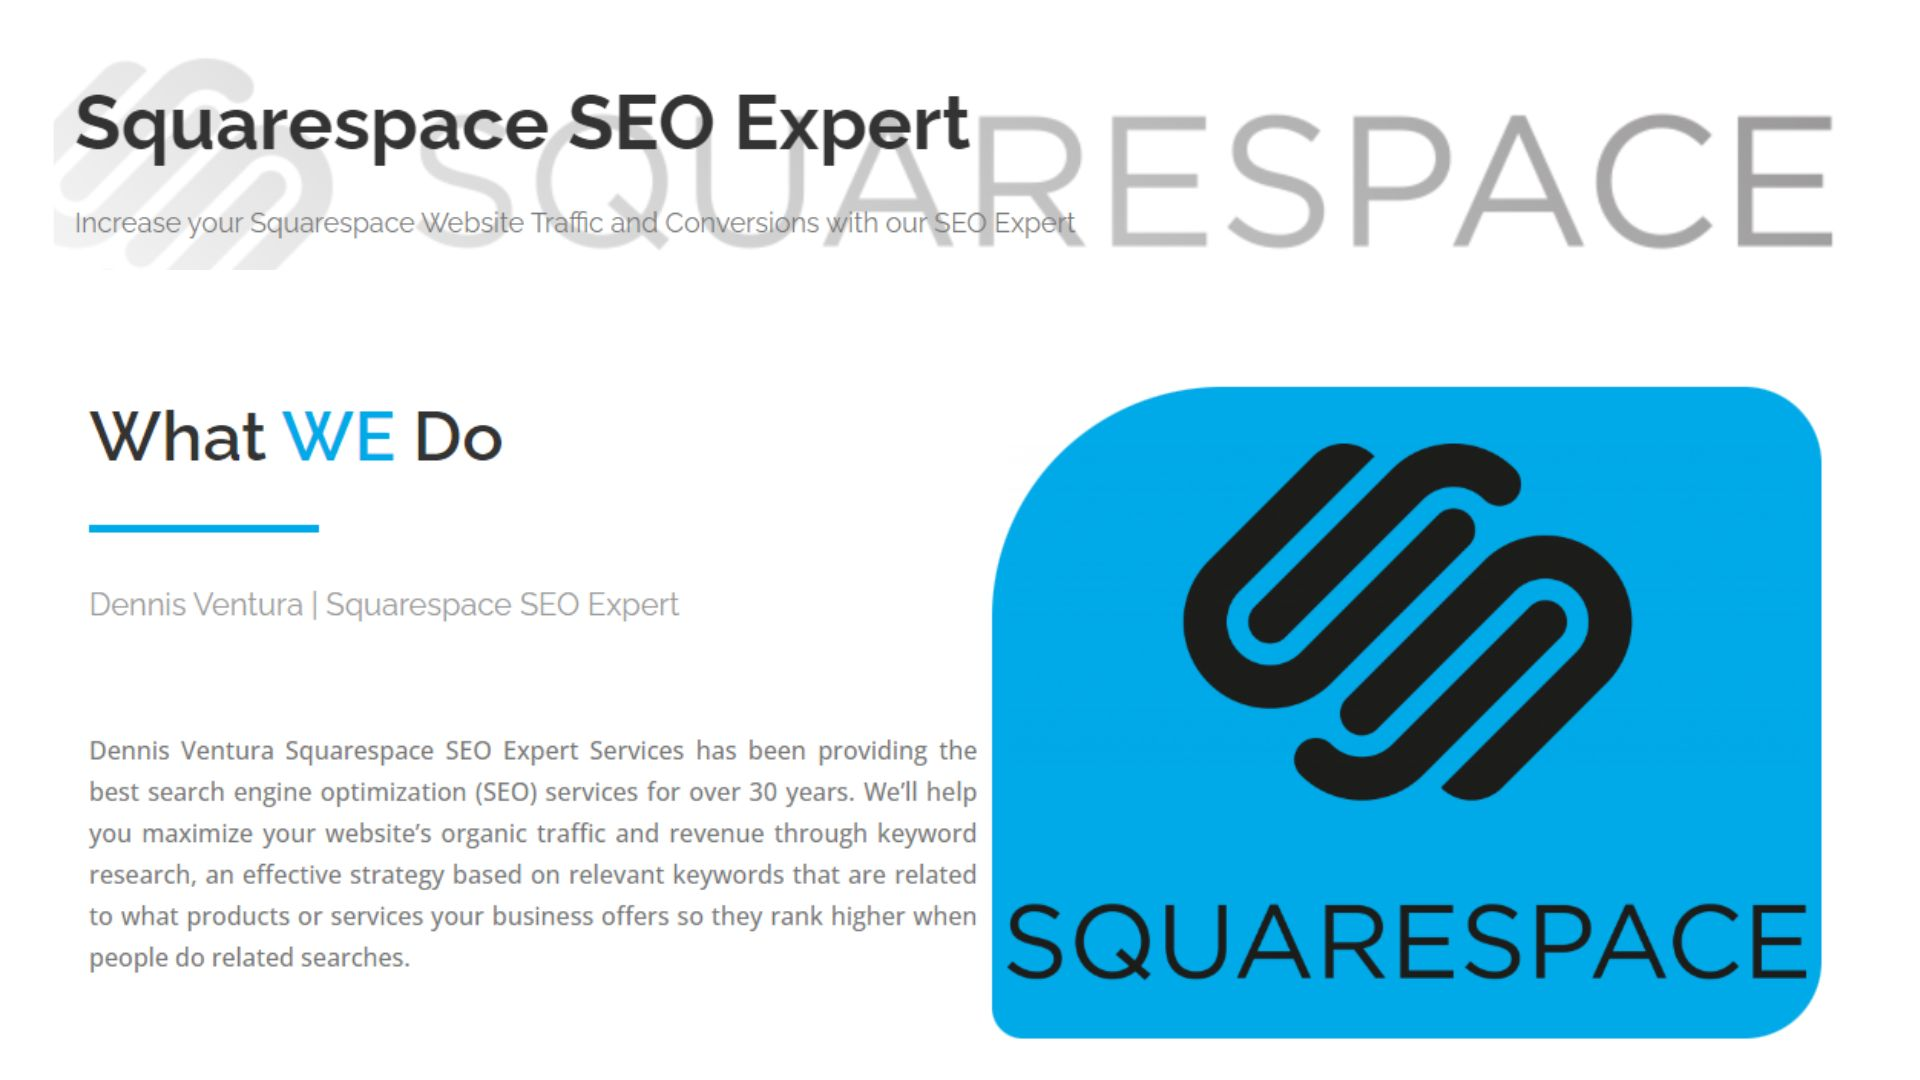 How To Find a Squarespace SEO Expert?